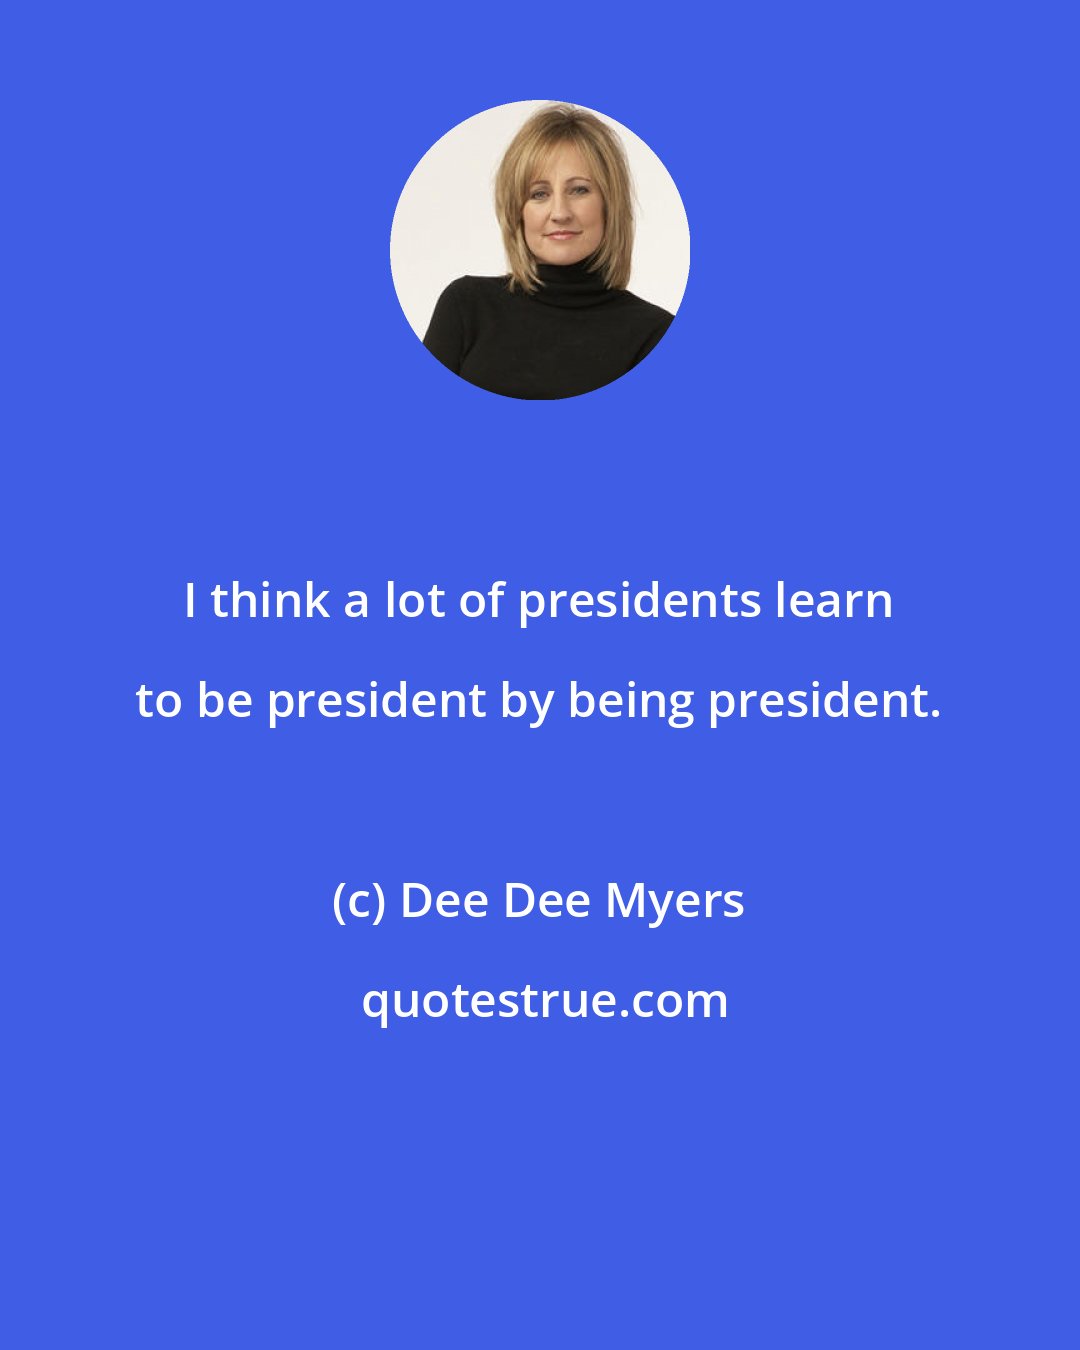 Dee Dee Myers: I think a lot of presidents learn to be president by being president.